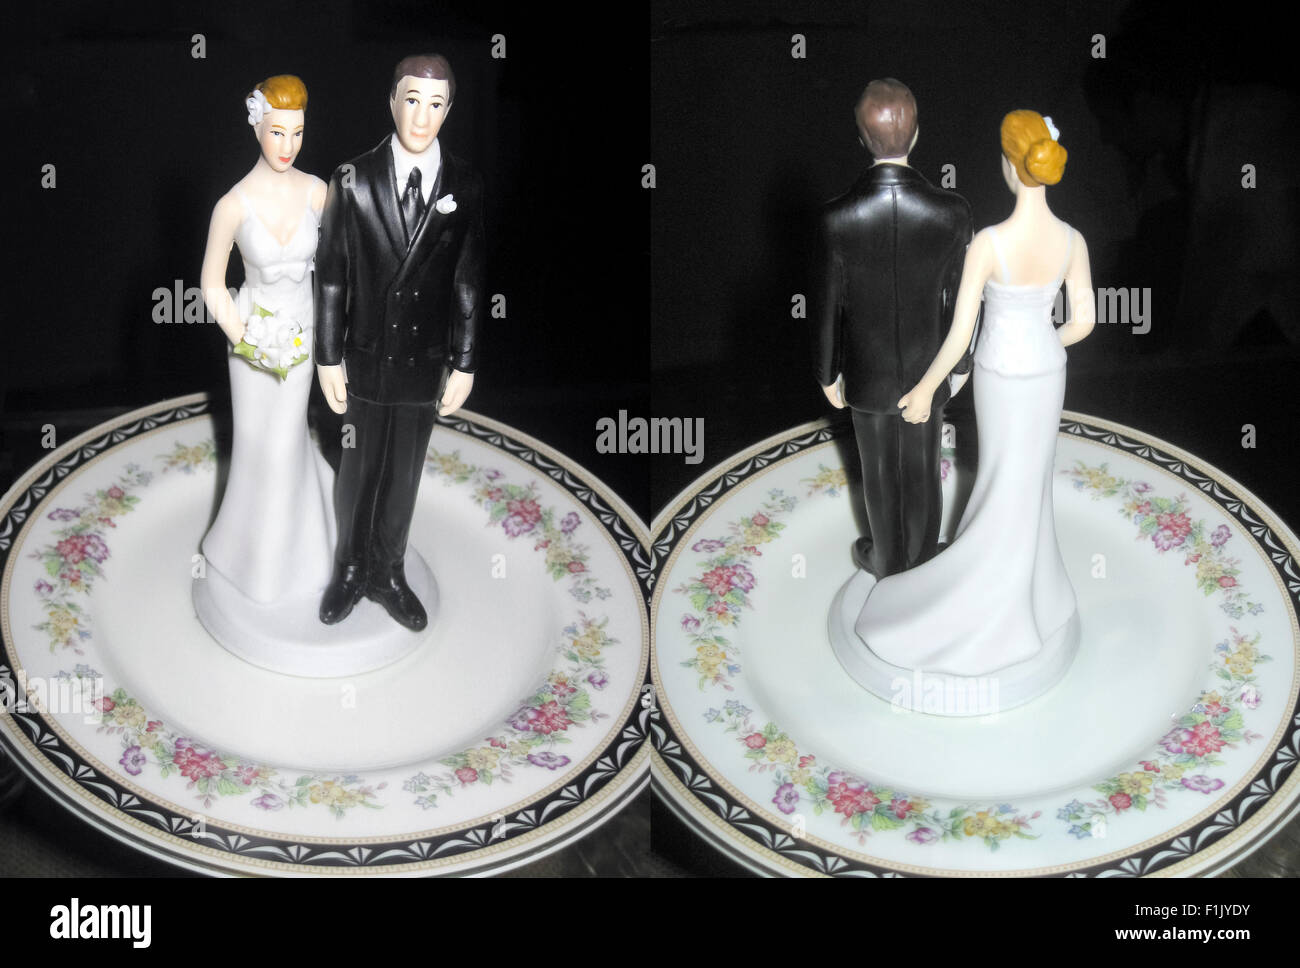 Front and rear views of a bride-and-groom figurine waiting to be put on the top of a wedding cake reveal that the bride has a sense of humor. Stock Photo